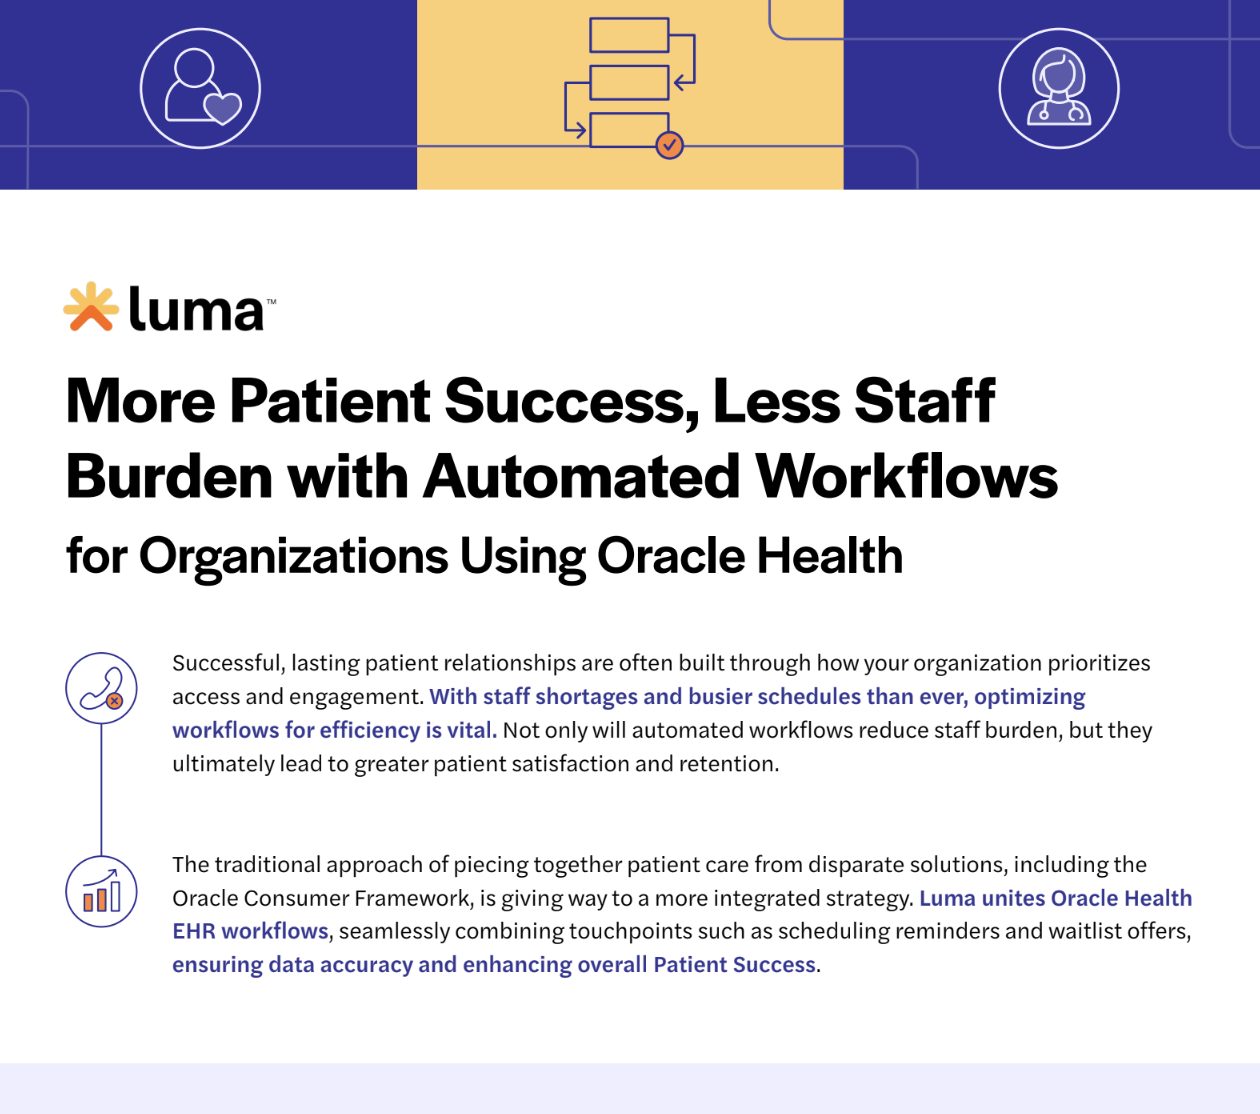 More Patient Success, Less Staff Burden for Organizations Using Oracle Health